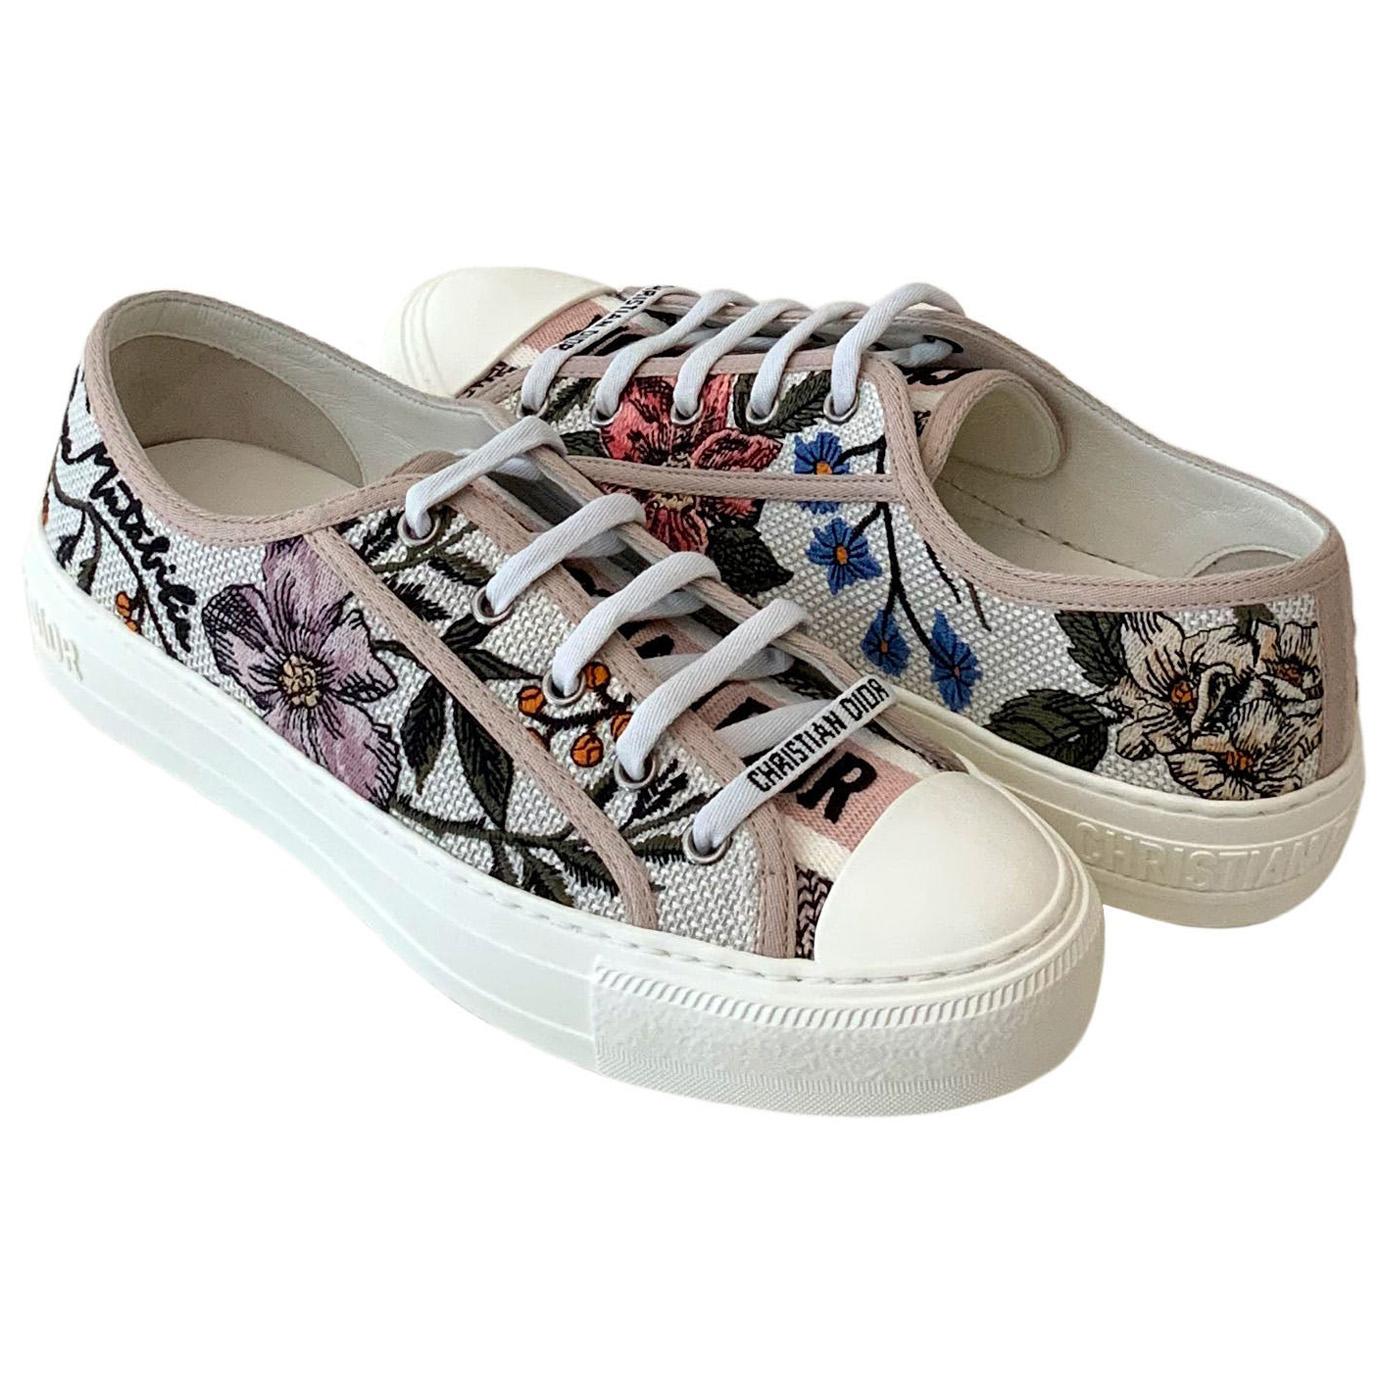 Christian Dior NEW Walk'n Dior Rosa Mutabilis Embroidered Cotton Sneakers